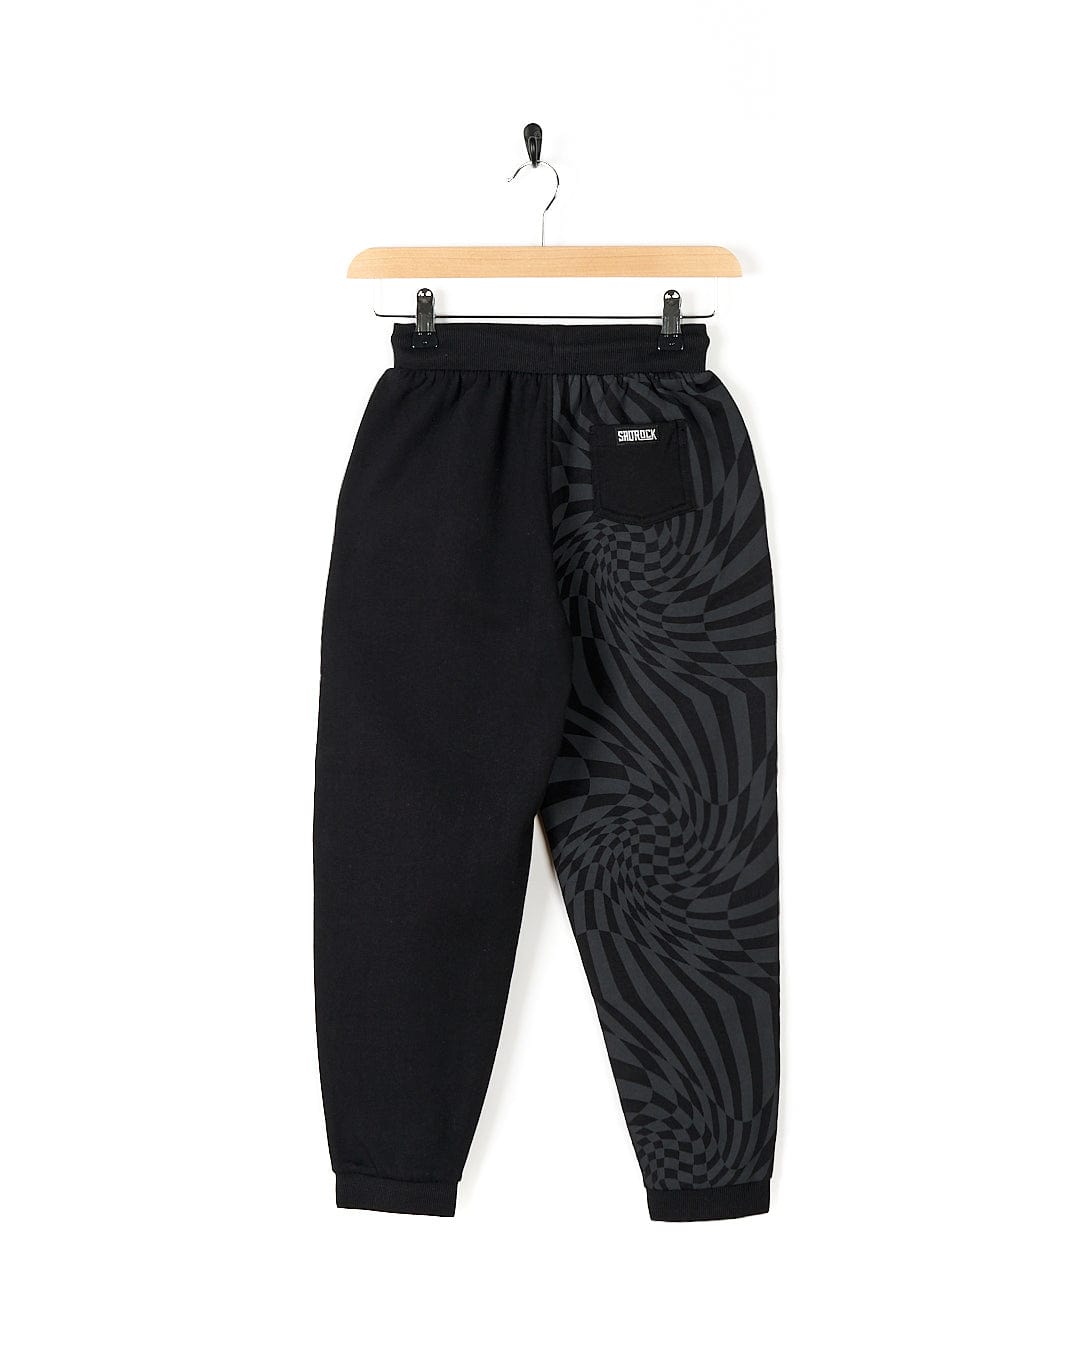 A stylish Saltrock Rip It - Kids Jogging Bottom - Black with a black and grey pattern, offering both comfort and style.